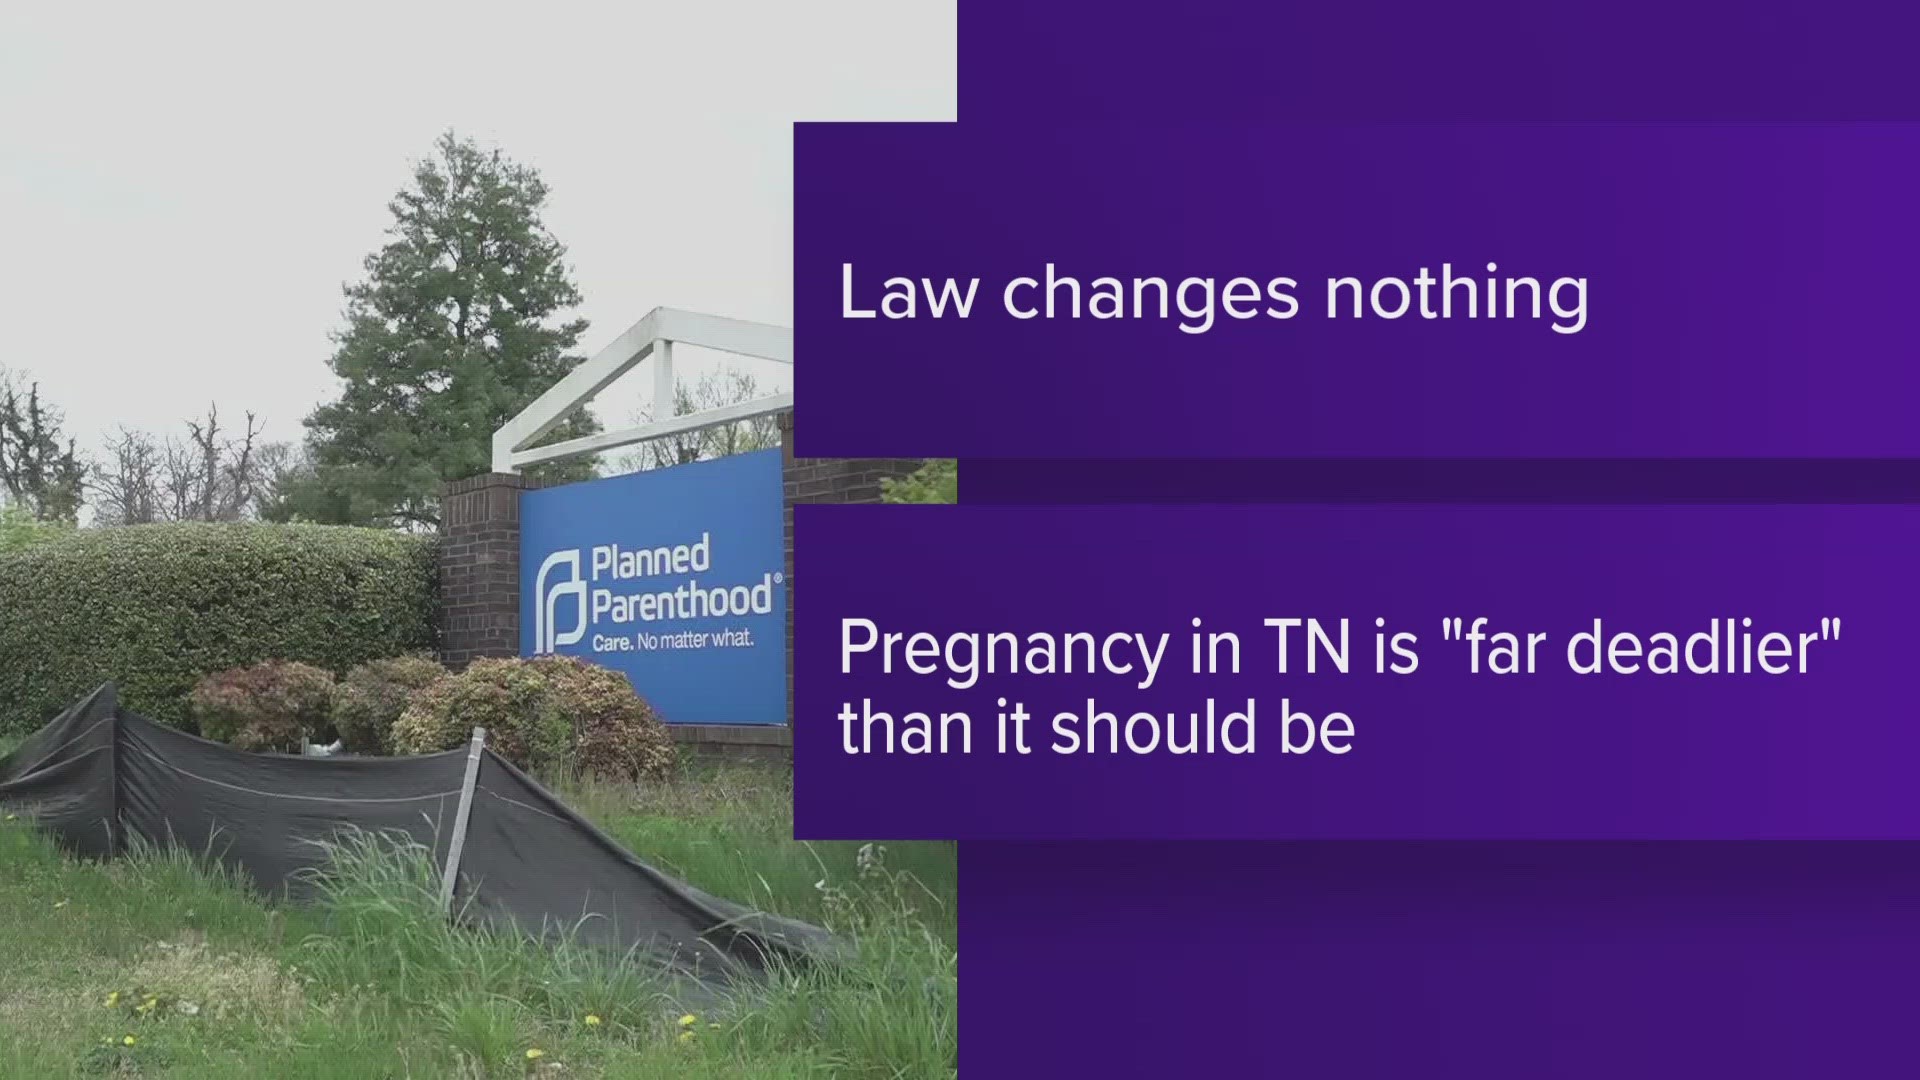 The bill also requires the state Department of Health to report the number of abortion treatments performed in Tennessee.